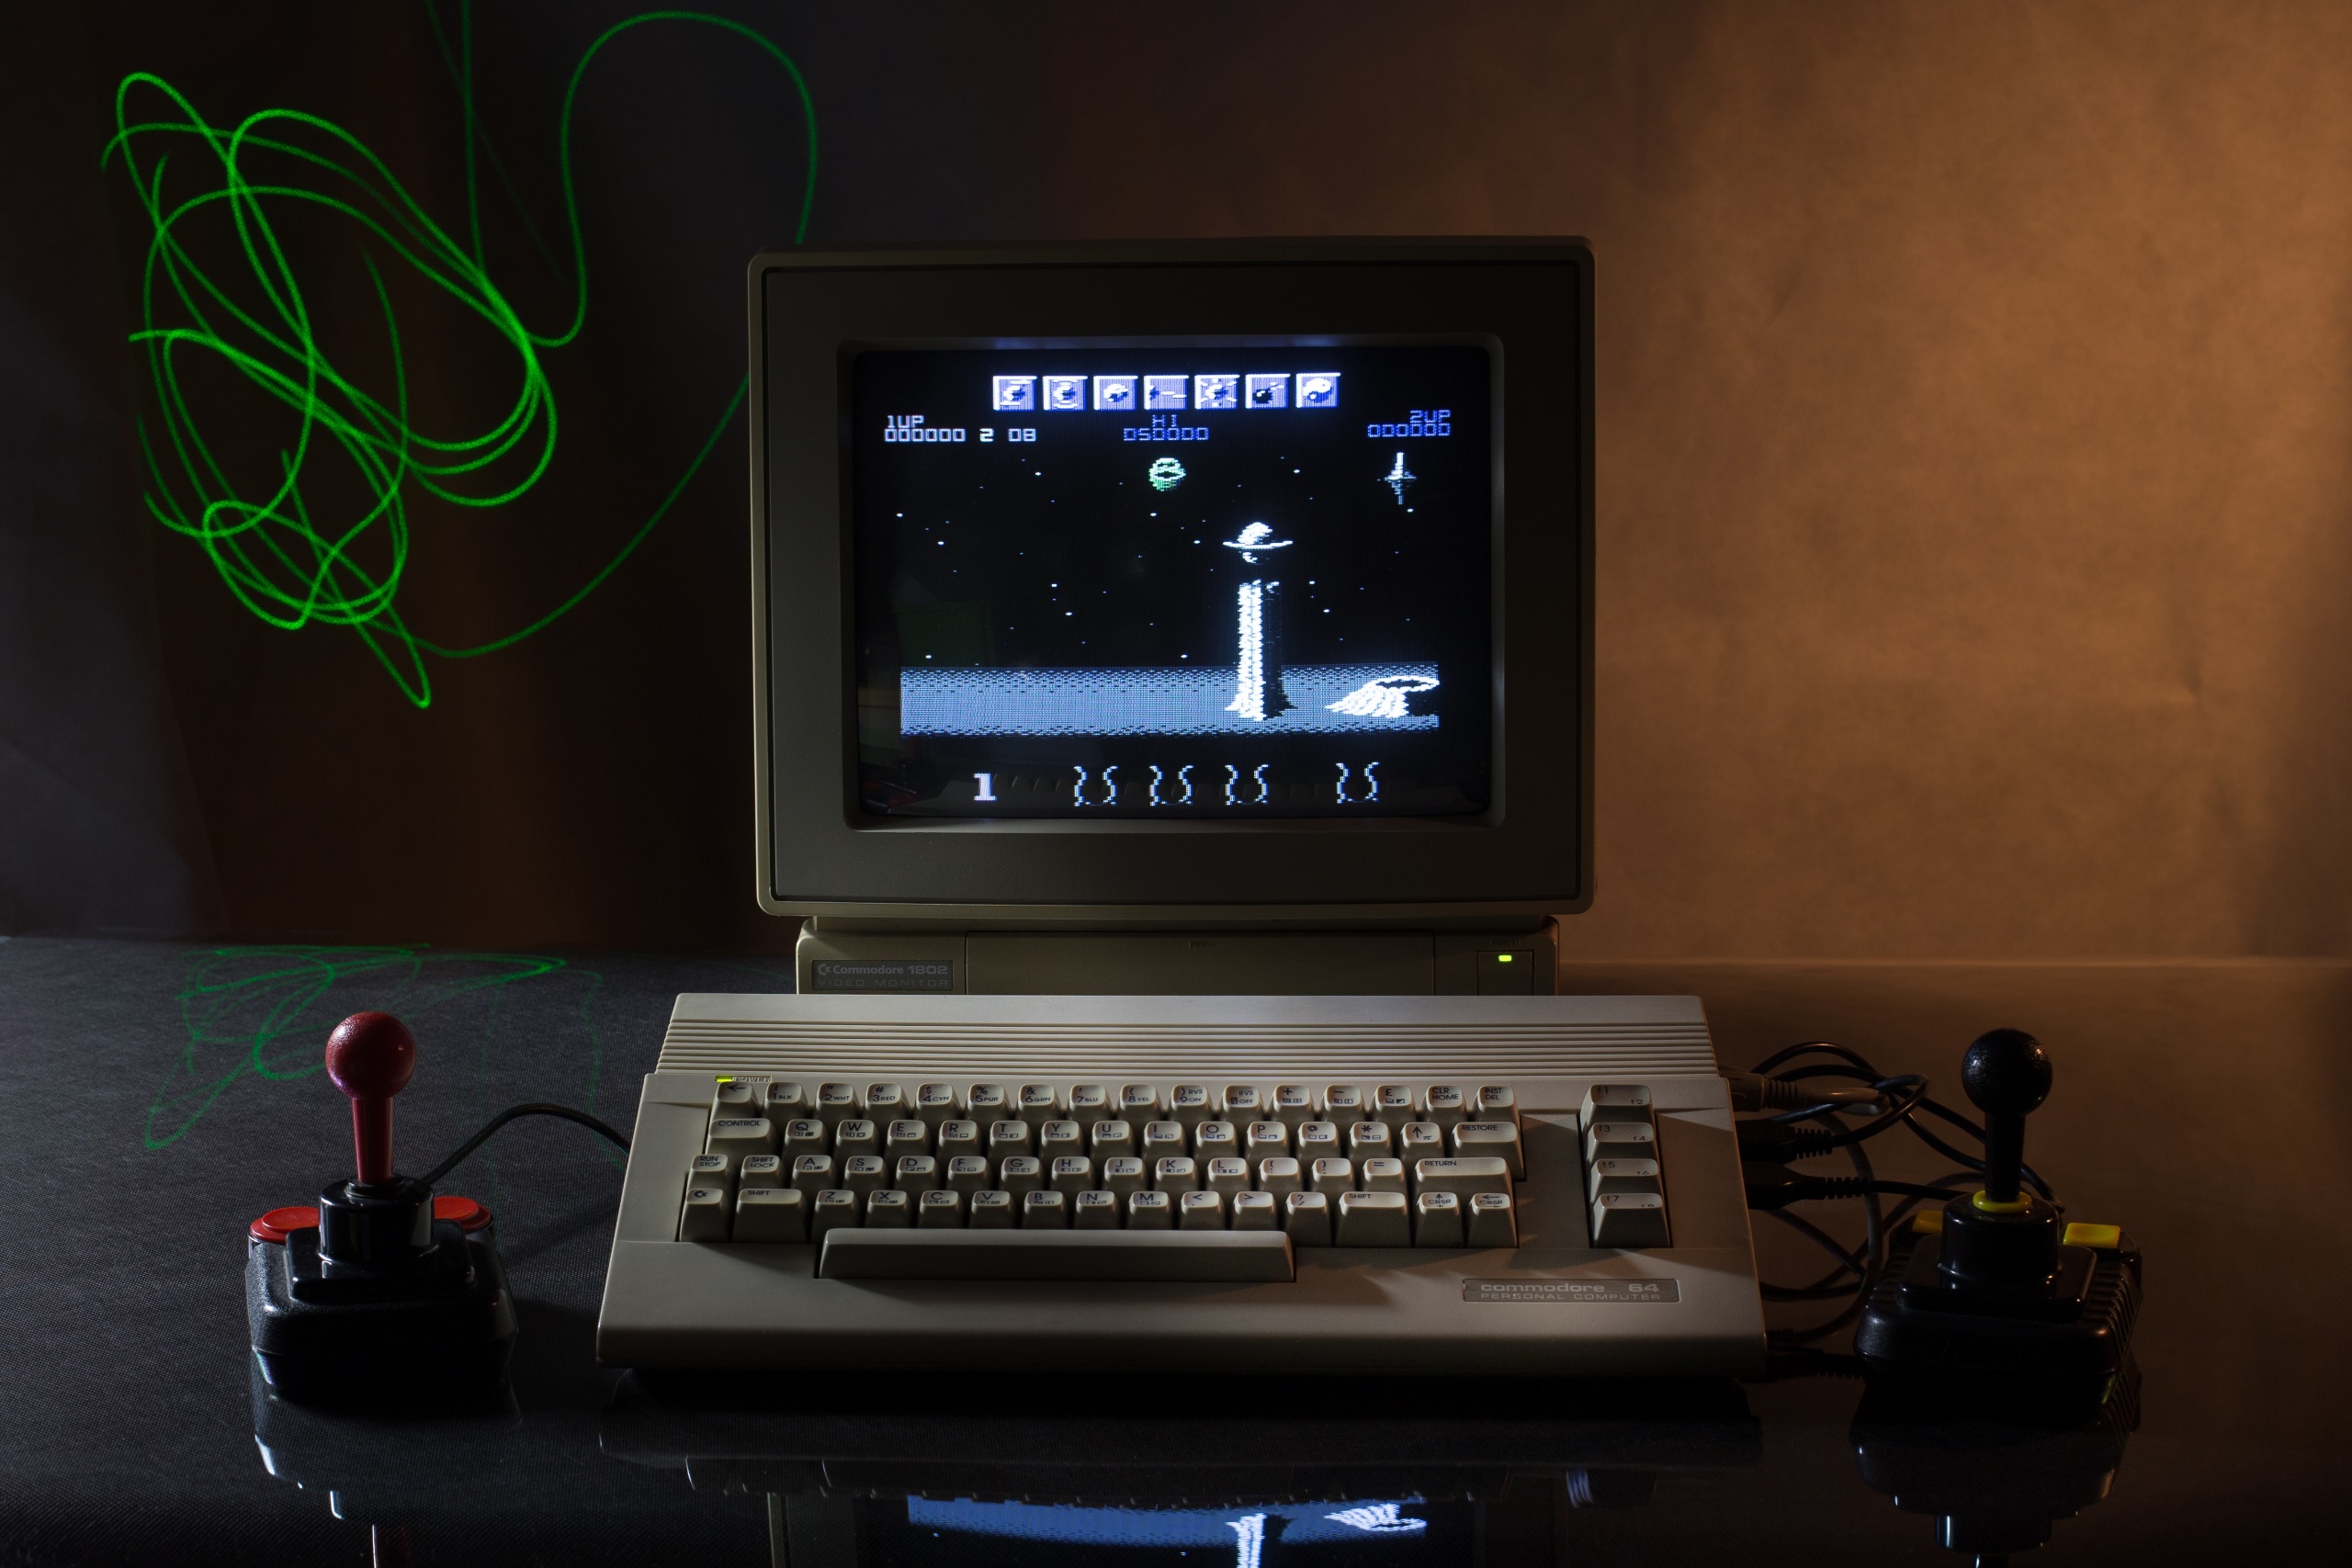 Commodore 8032 Wallpapers